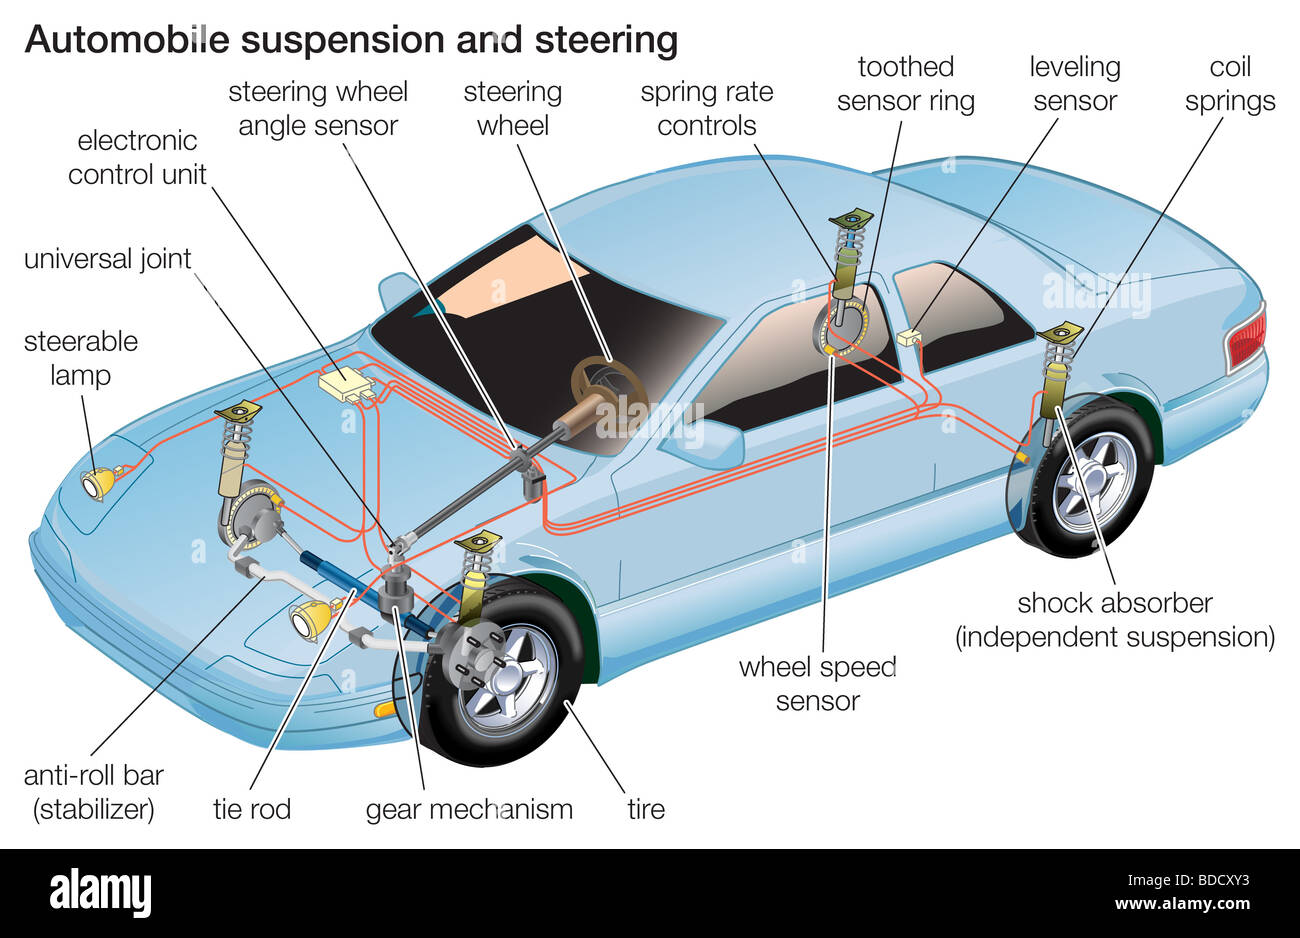 Automobile suspension and steering Stock Photo